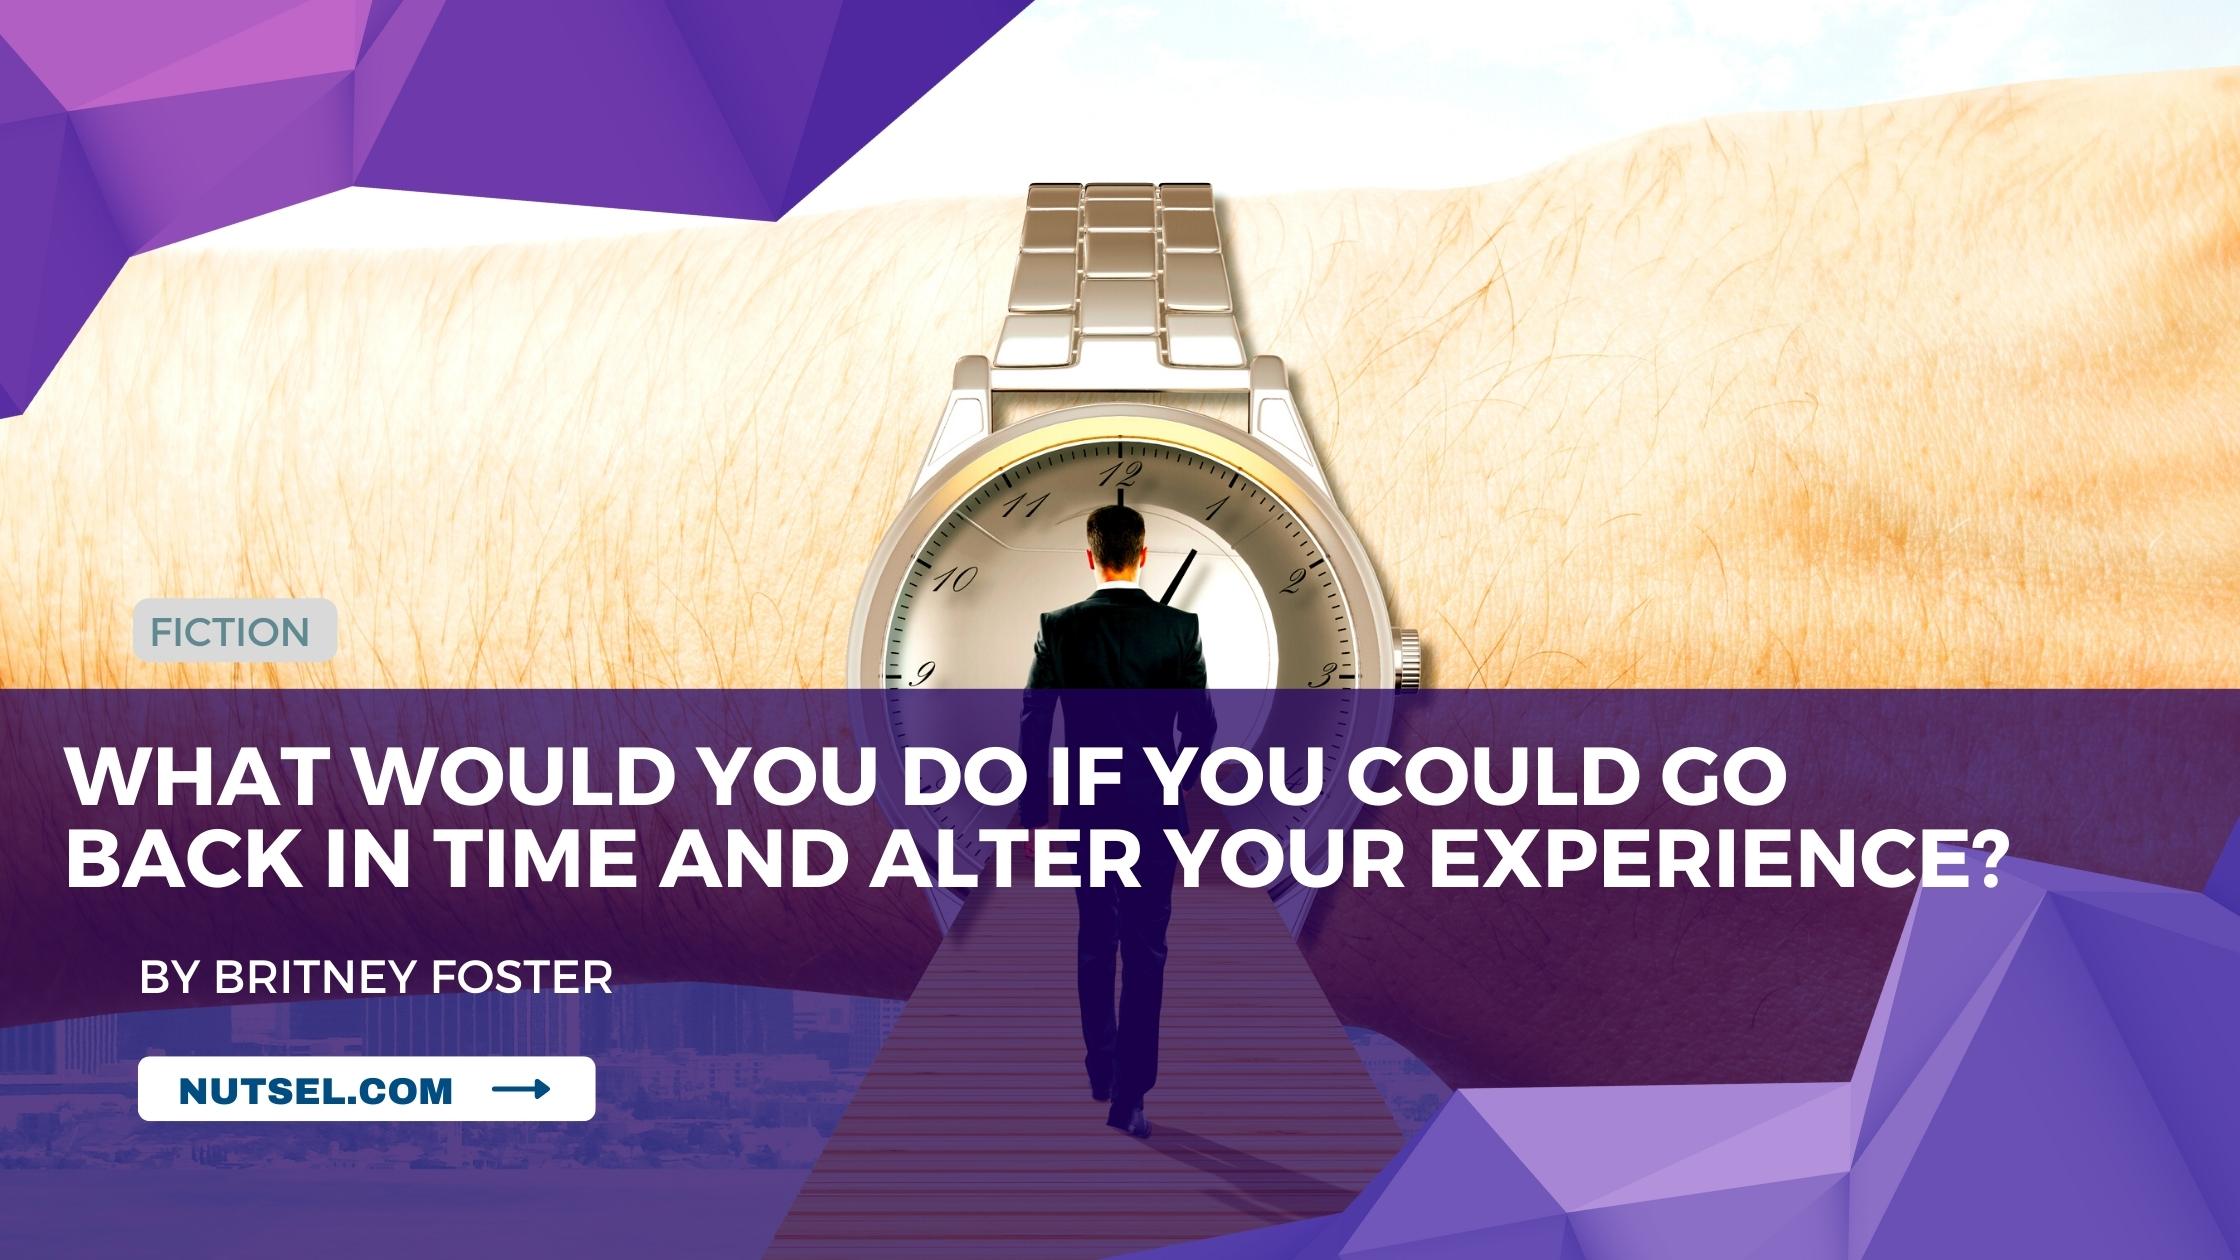 What would you do if you could go back in time and alter your experience?